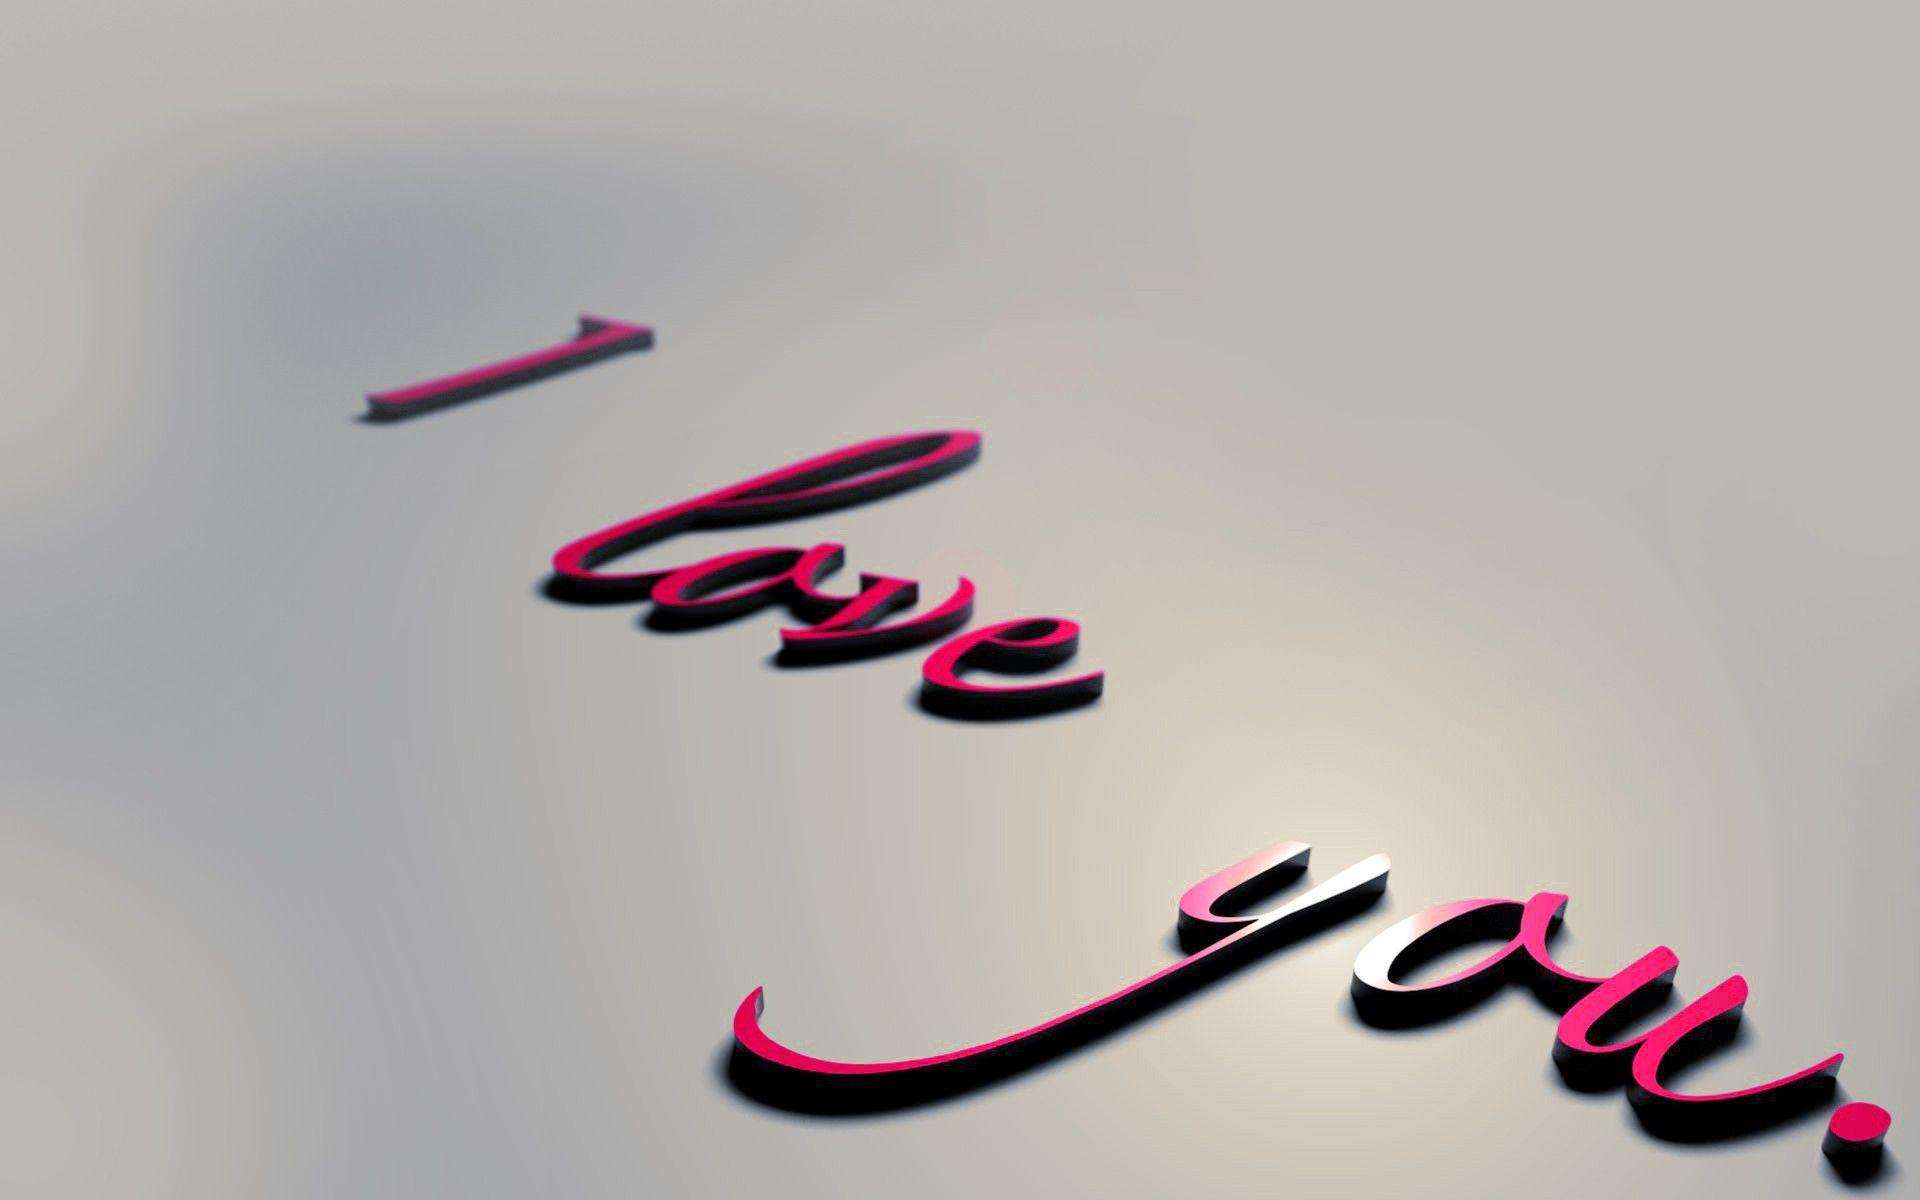 Free I Love You3D Wallpaper HD Image Widescreen You D Text Of